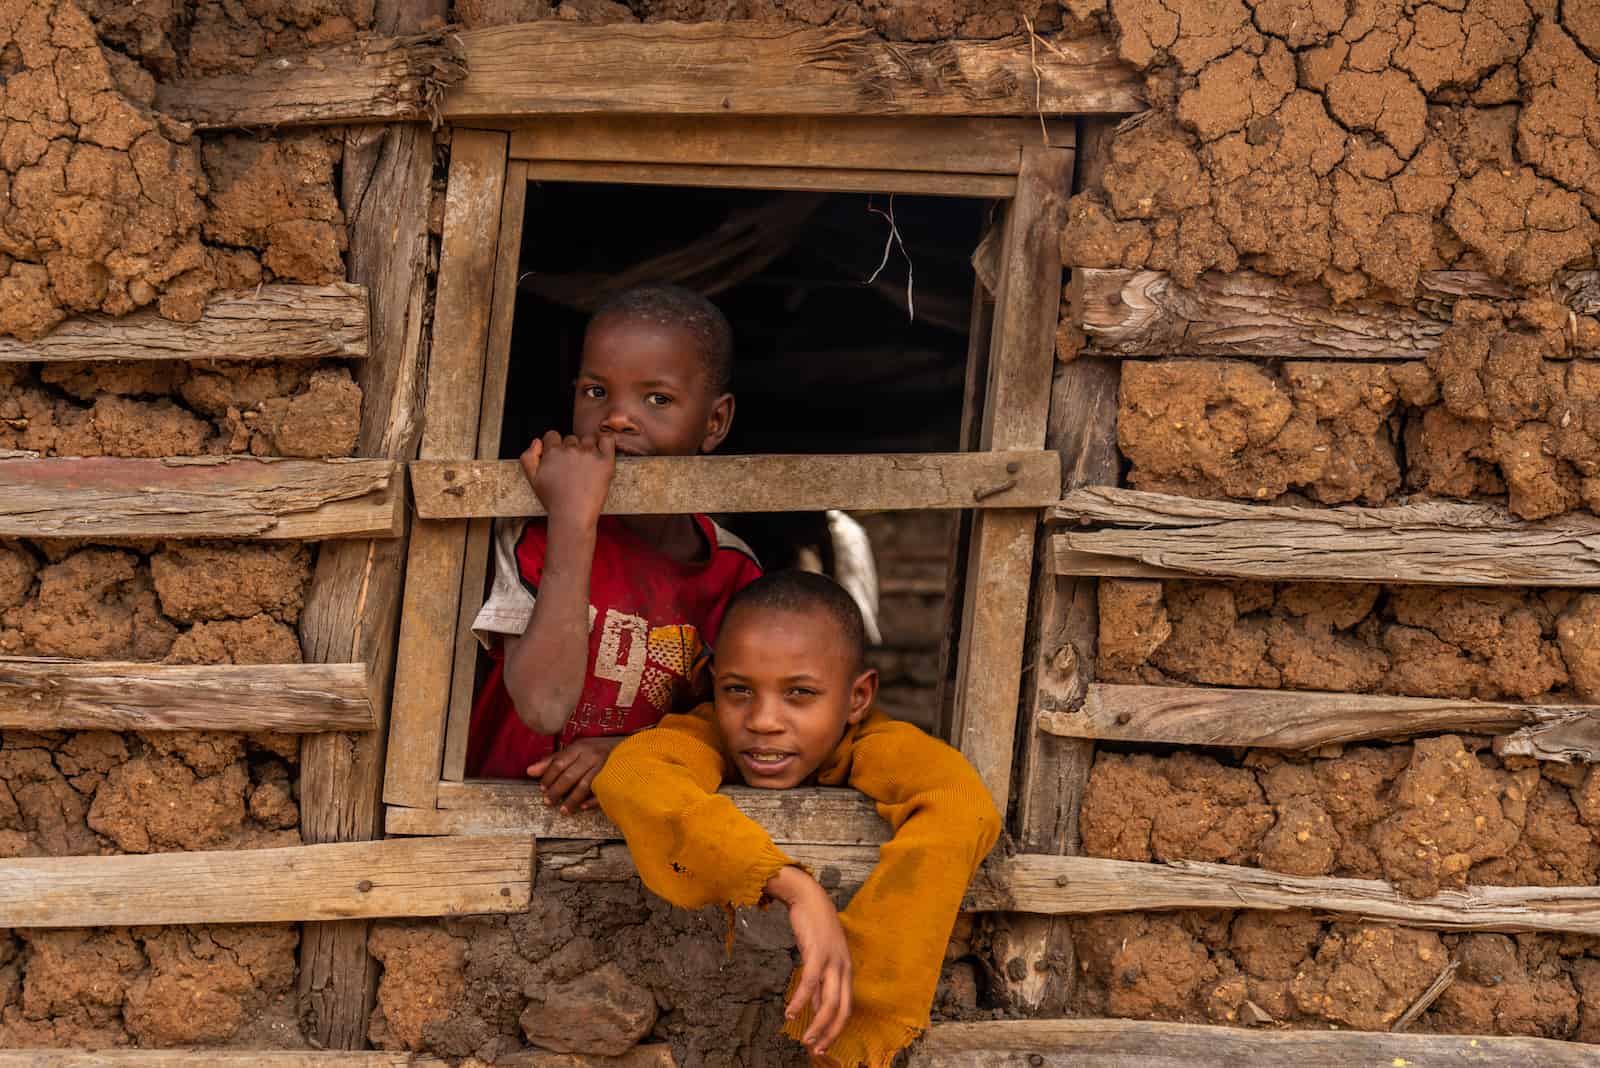 Two boys look out the window of a mud and wood home.